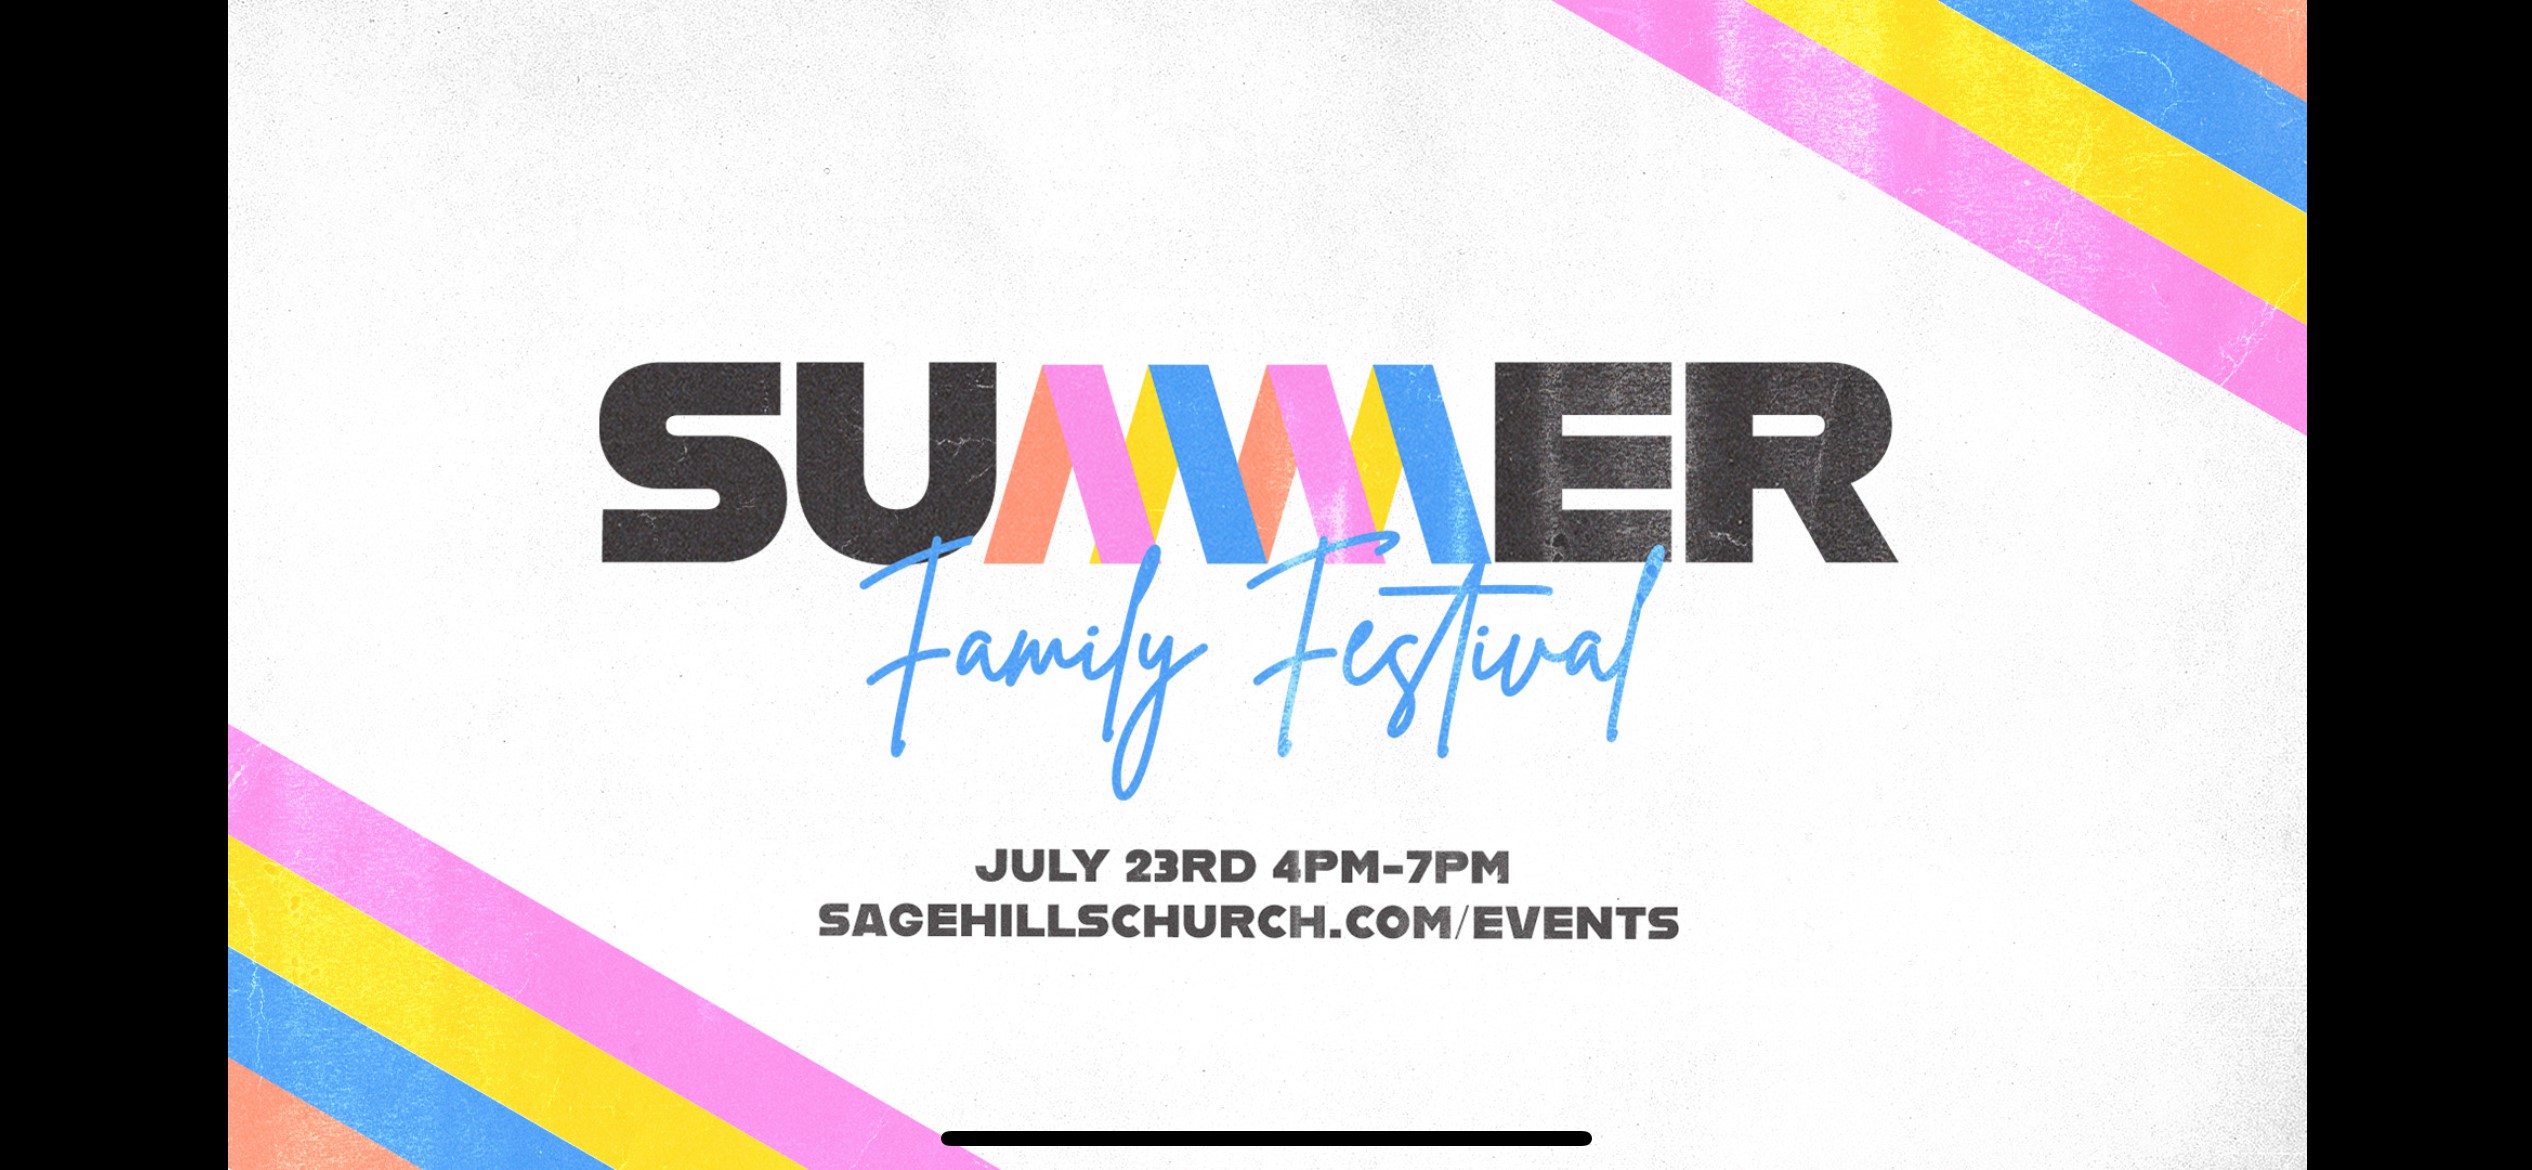 <h1 class="tribe-events-single-event-title">Summer Family Festival</h1>